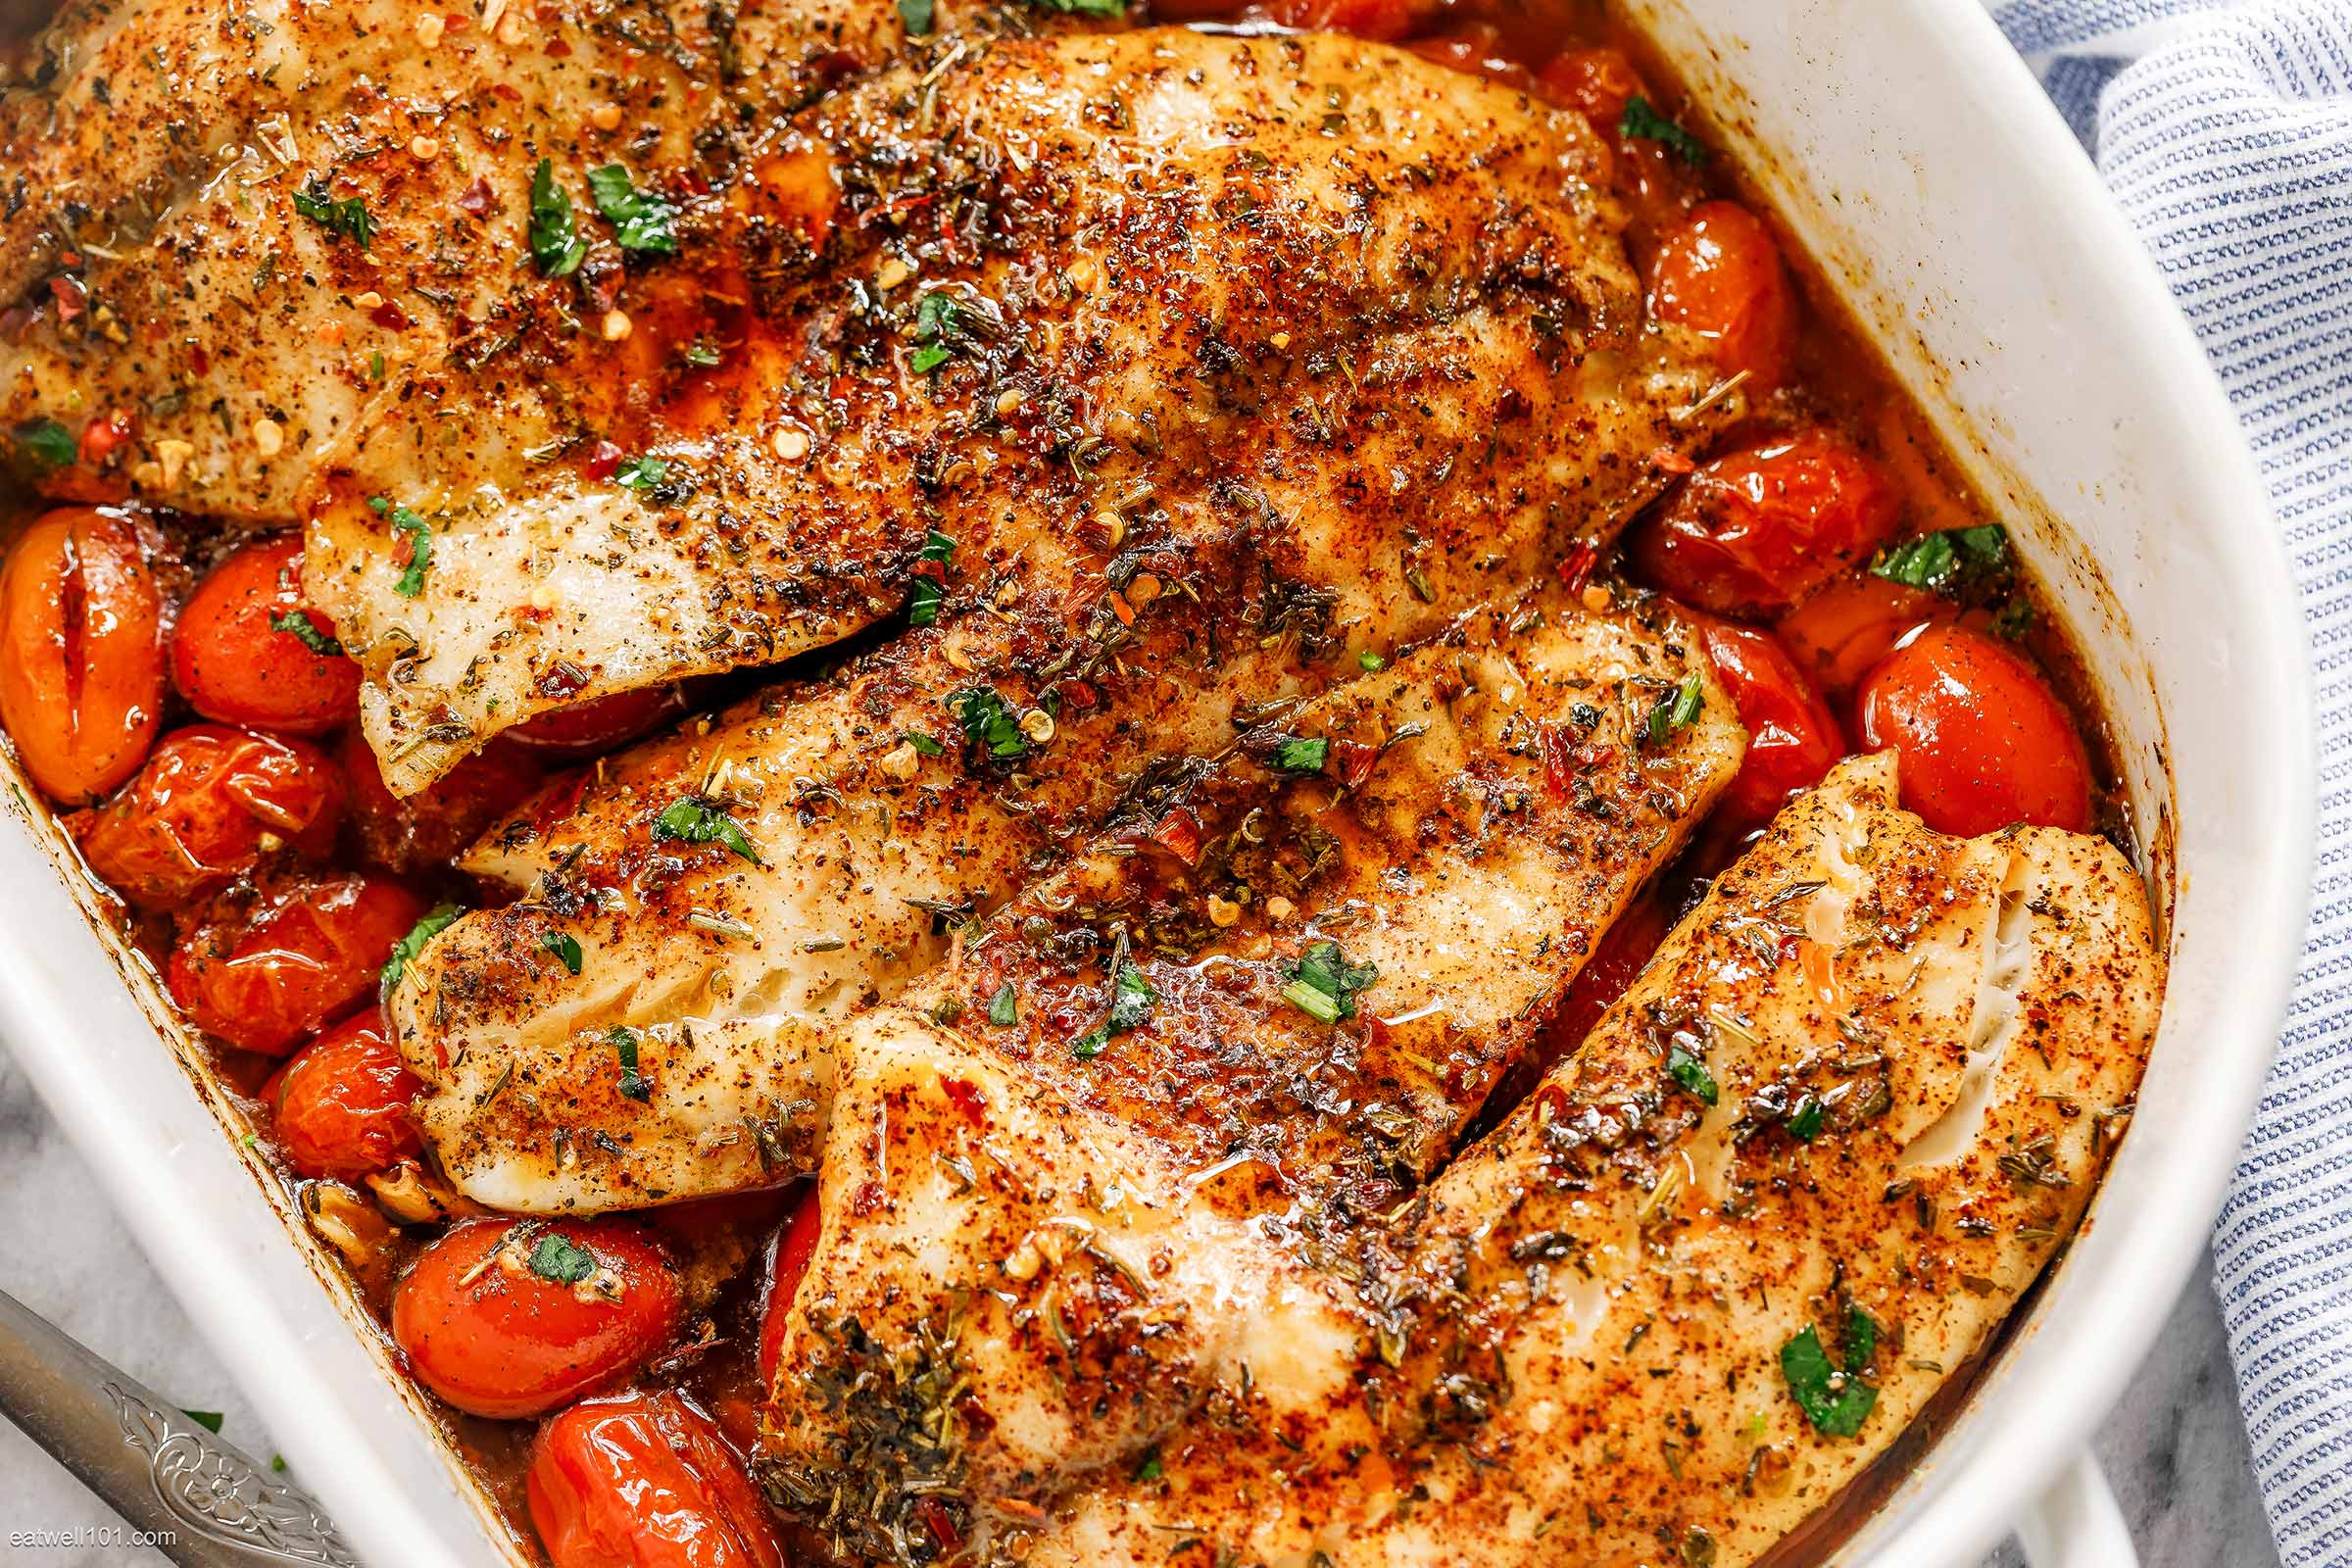 12 Healthy Baked Fish Recipes for Busy Weeknights